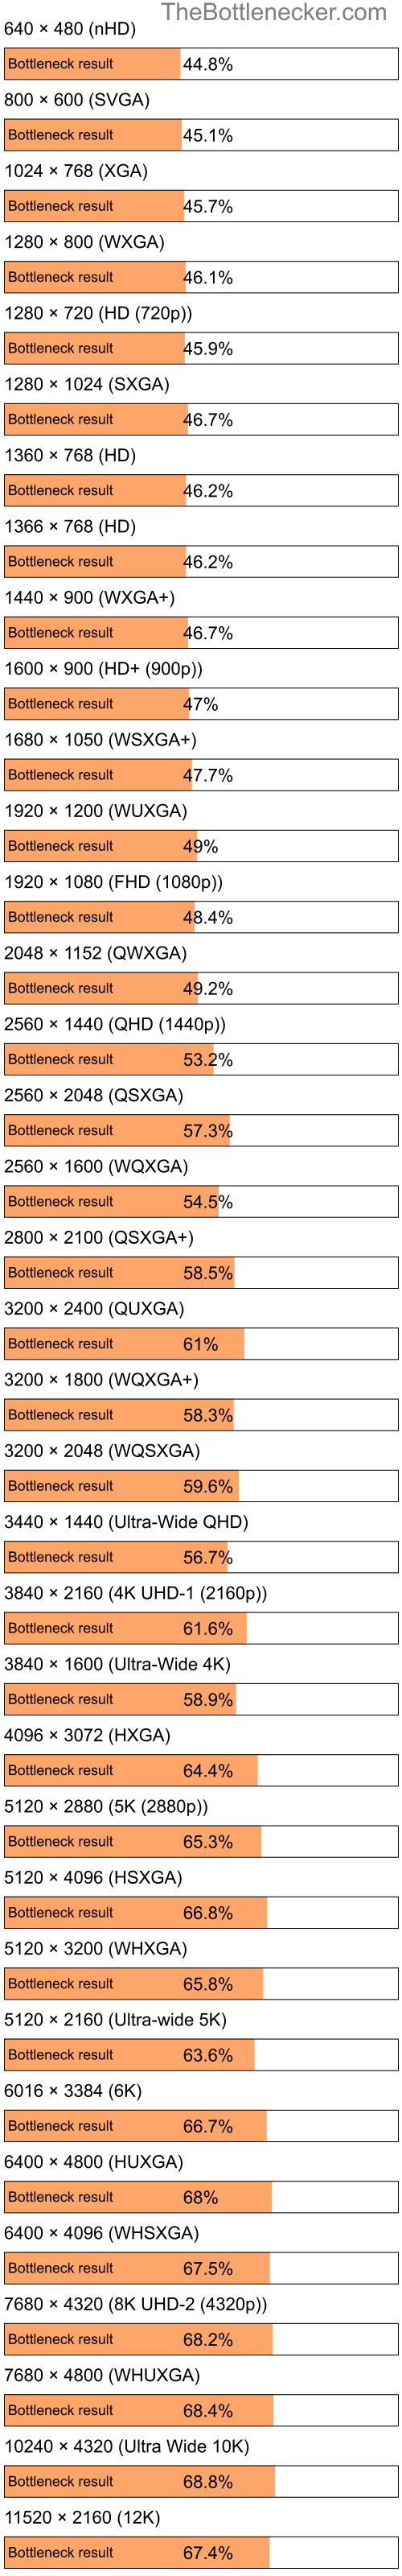 Bottleneck results by resolution for Intel Pentium 4 and NVIDIA GeForce 9200M GS in Processor Intense Tasks